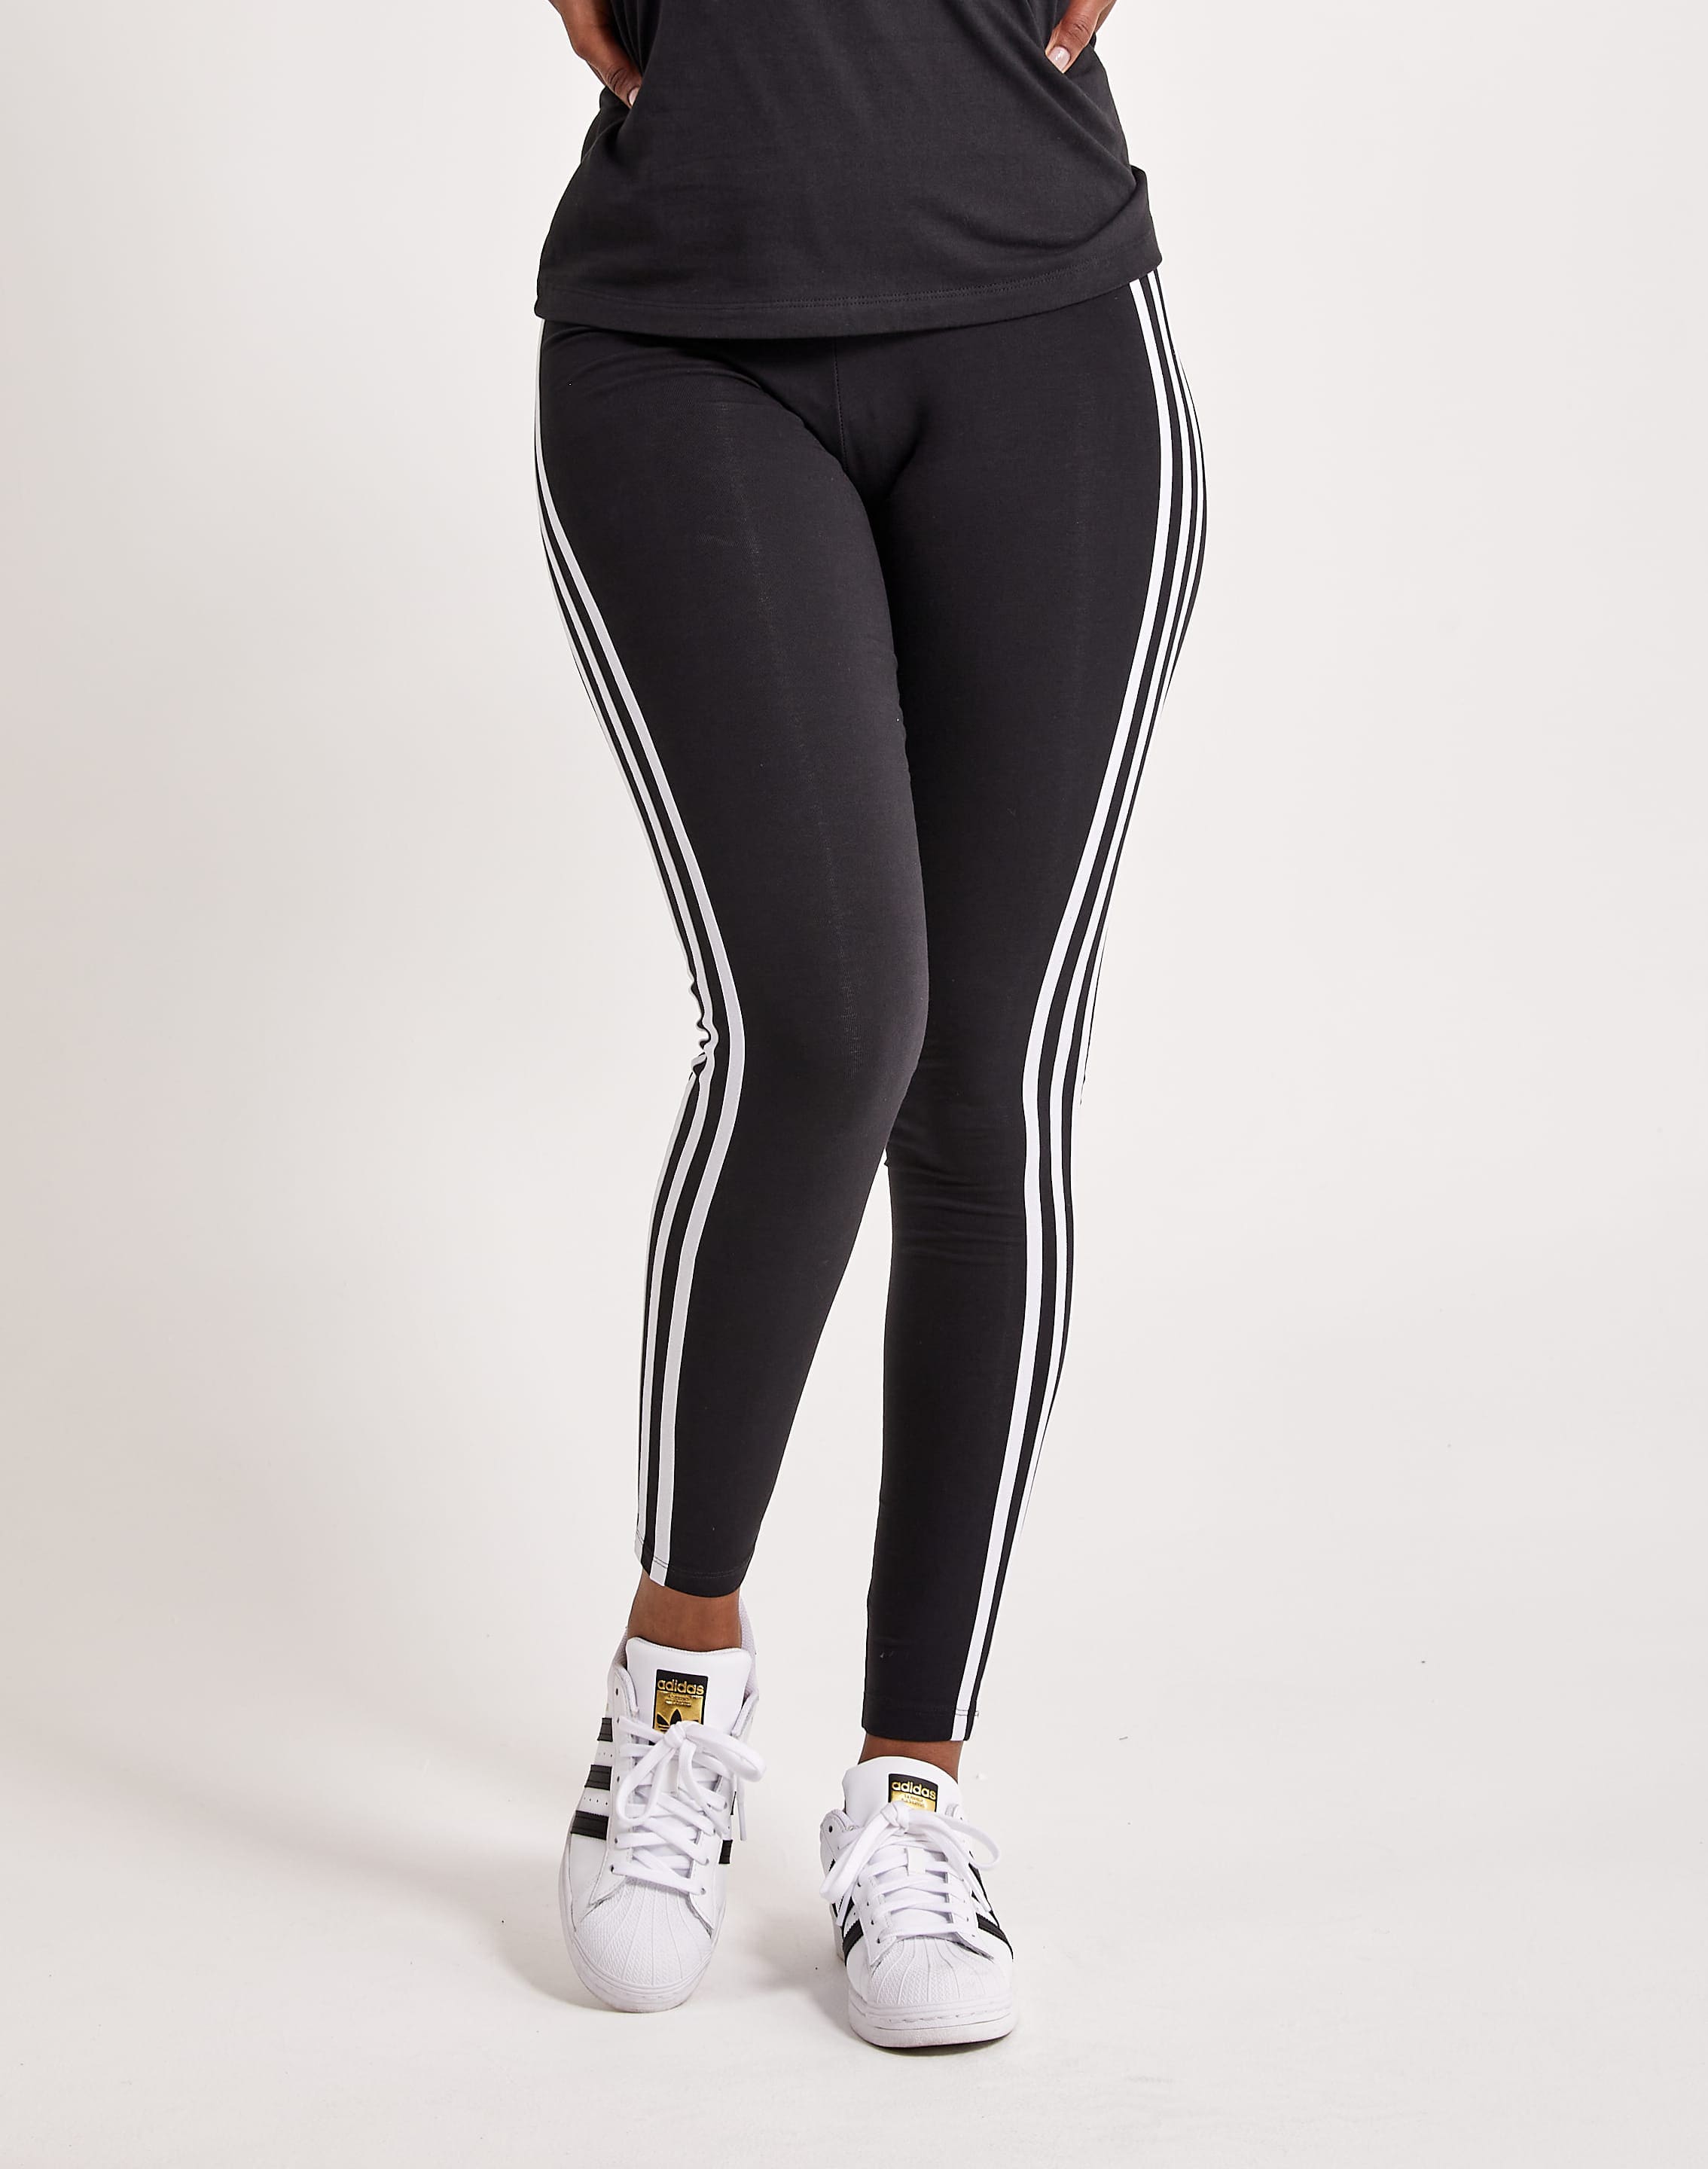 What To Wear With Grey Adidas Leggings? – solowomen